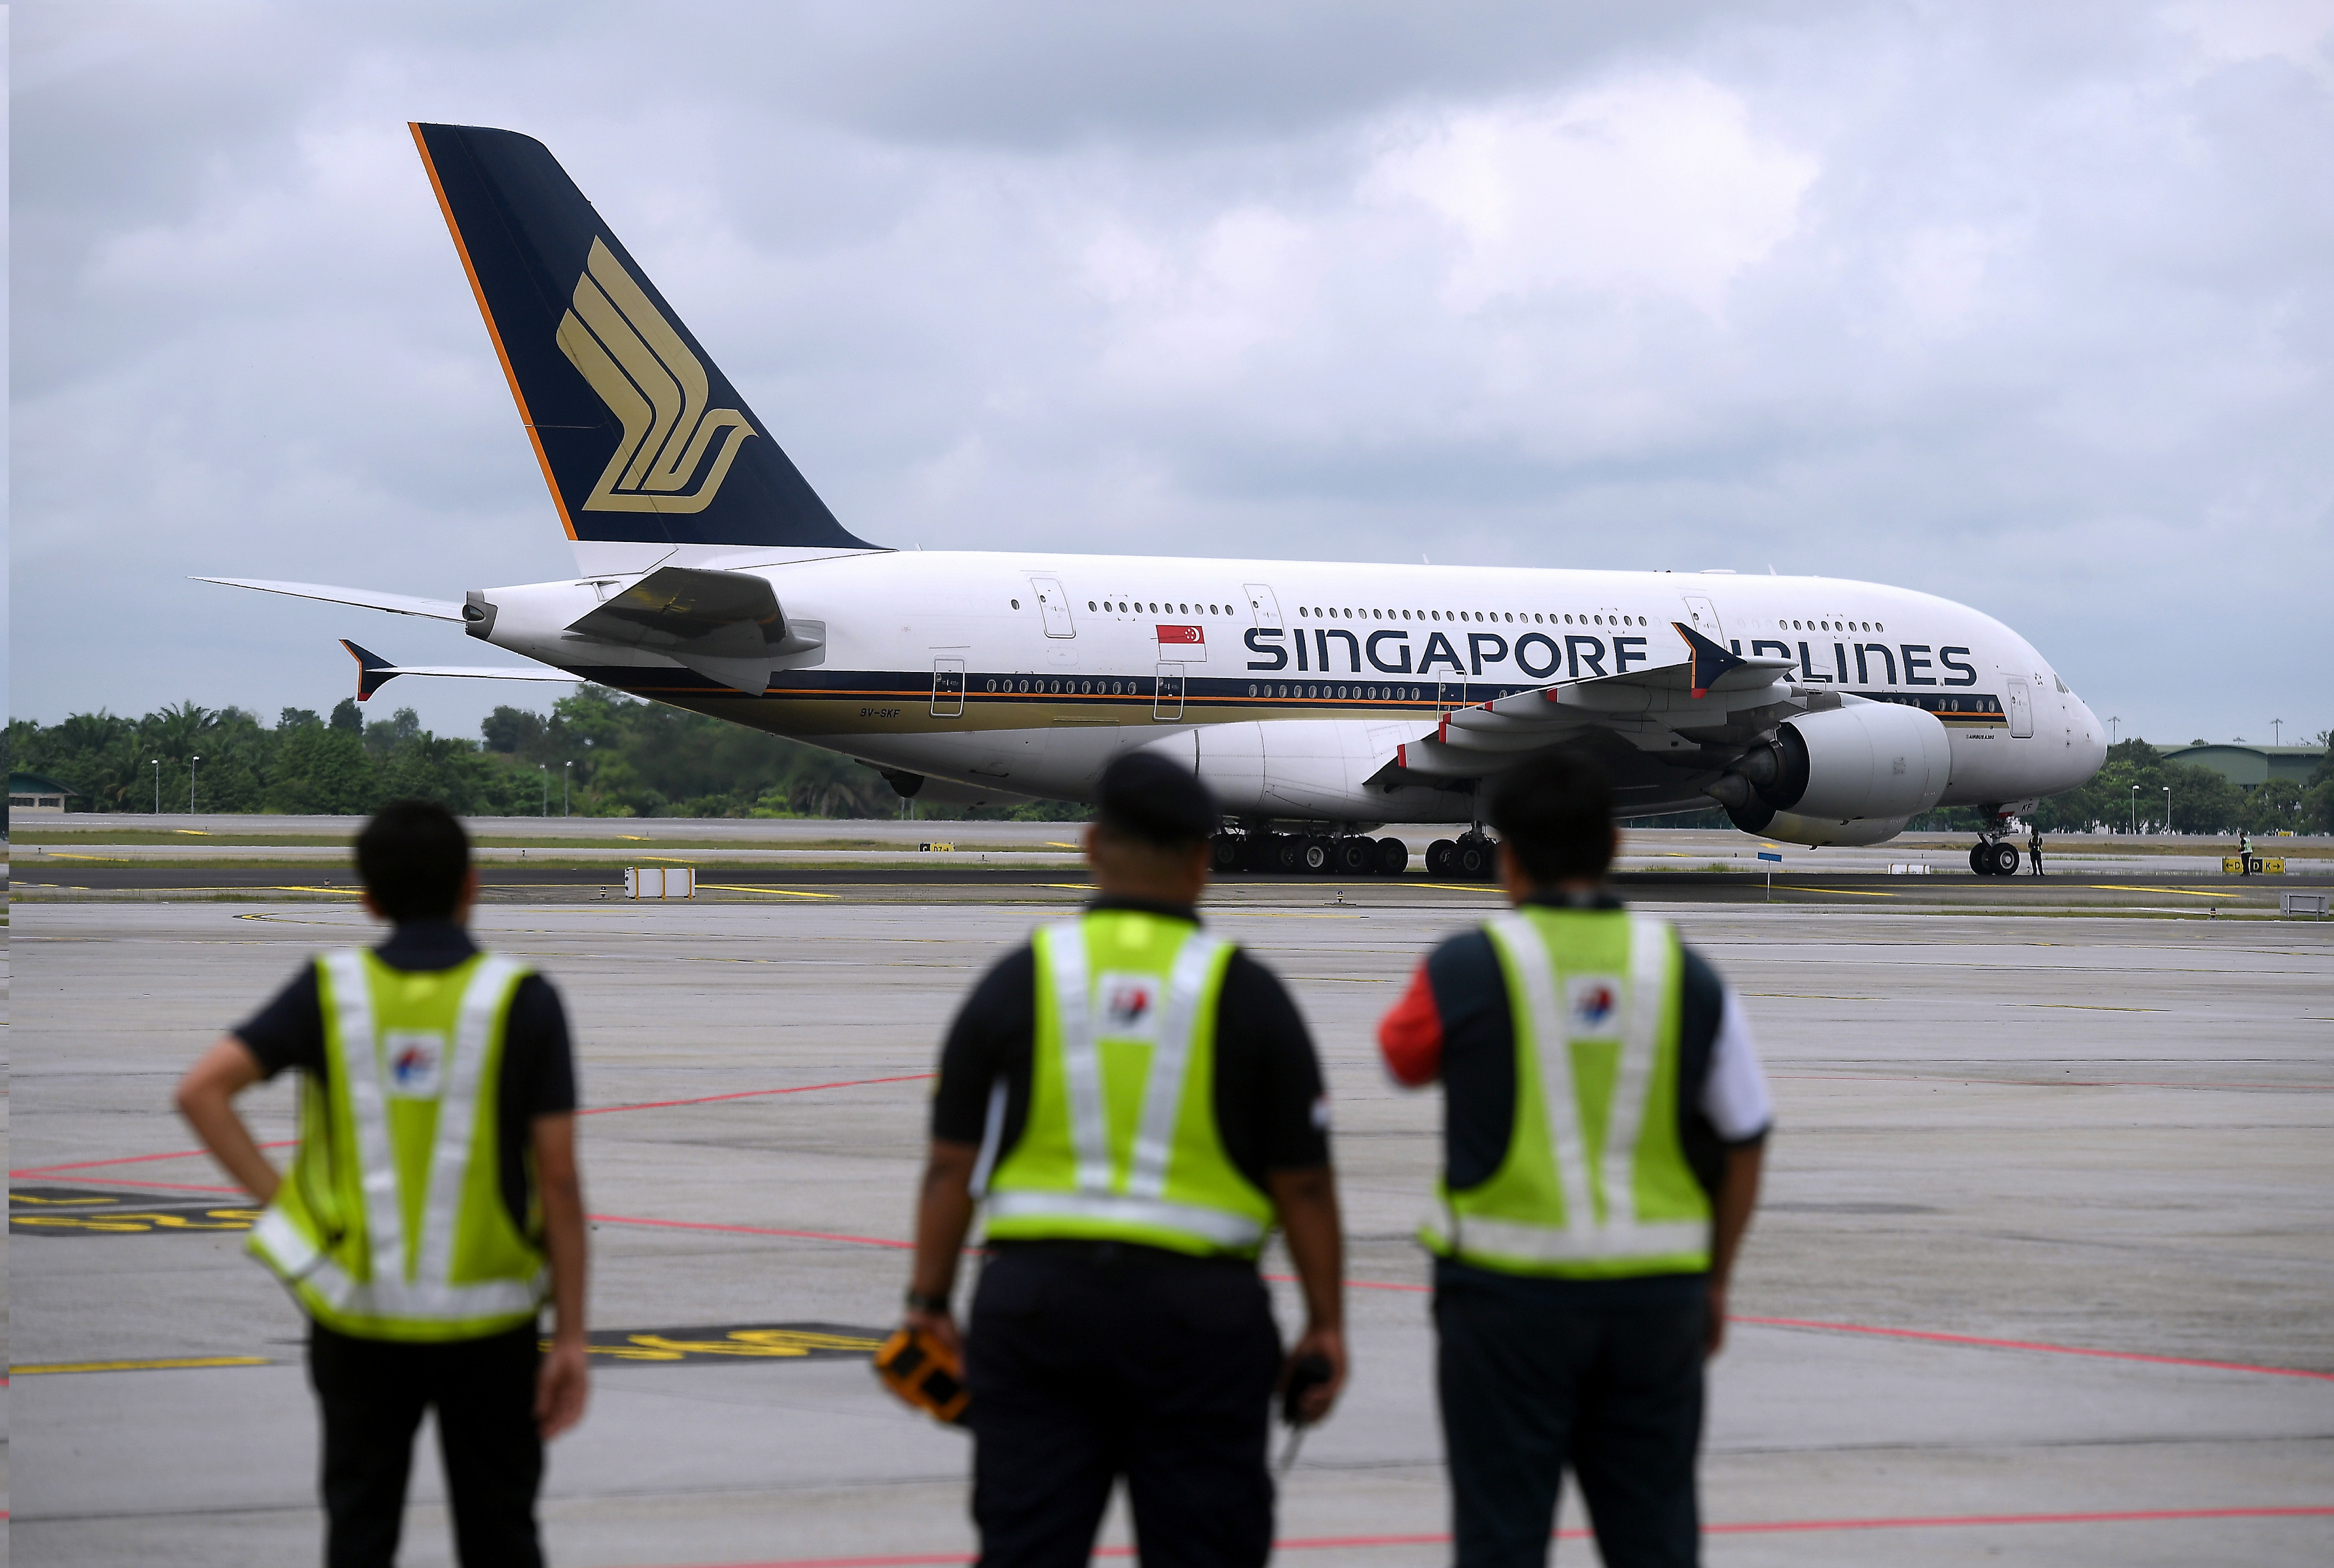 Malaysia airports’ safety measures continue to meet global standards